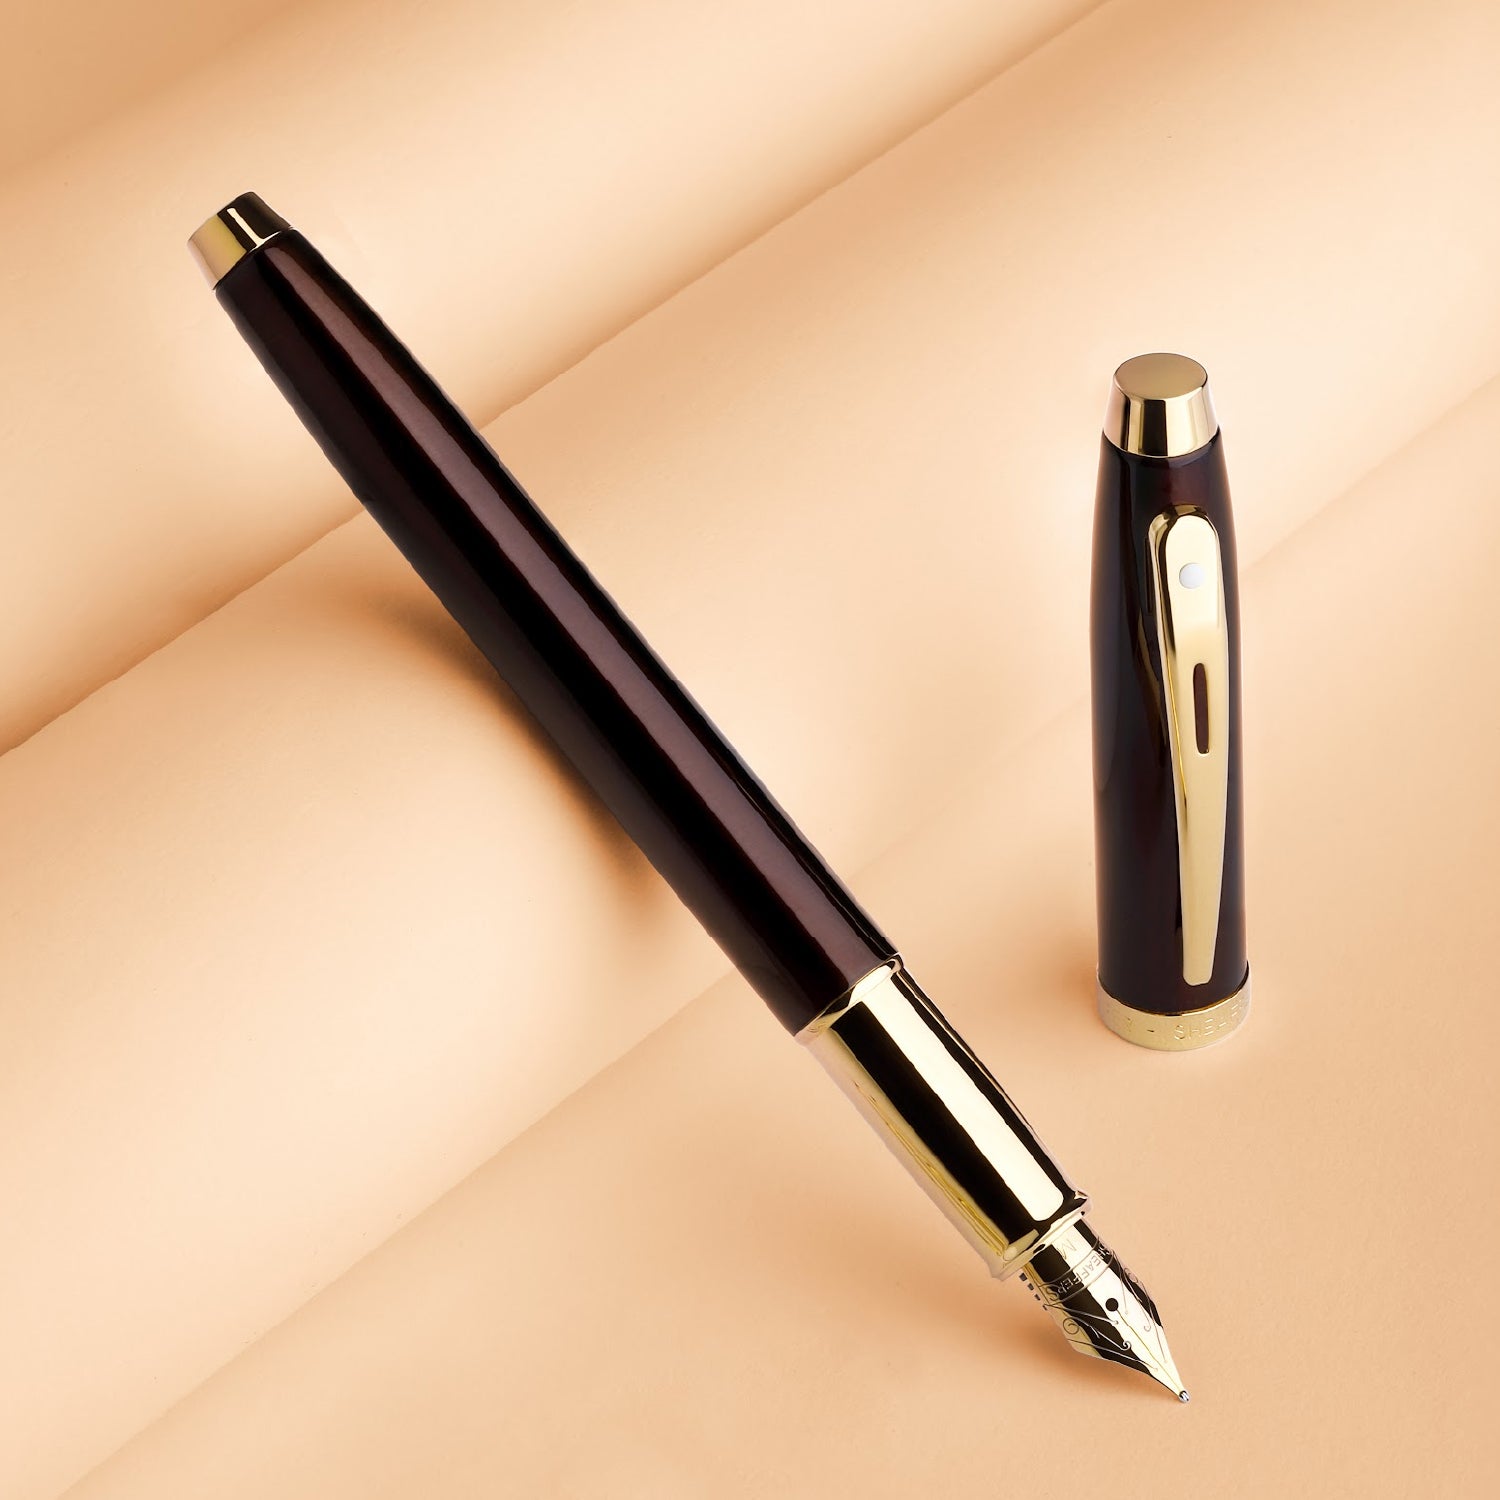 Sheaffer® 100 9370 Glossy Coffee Brown Fountain Pen With PVD Gold-Tone Trim - Medium